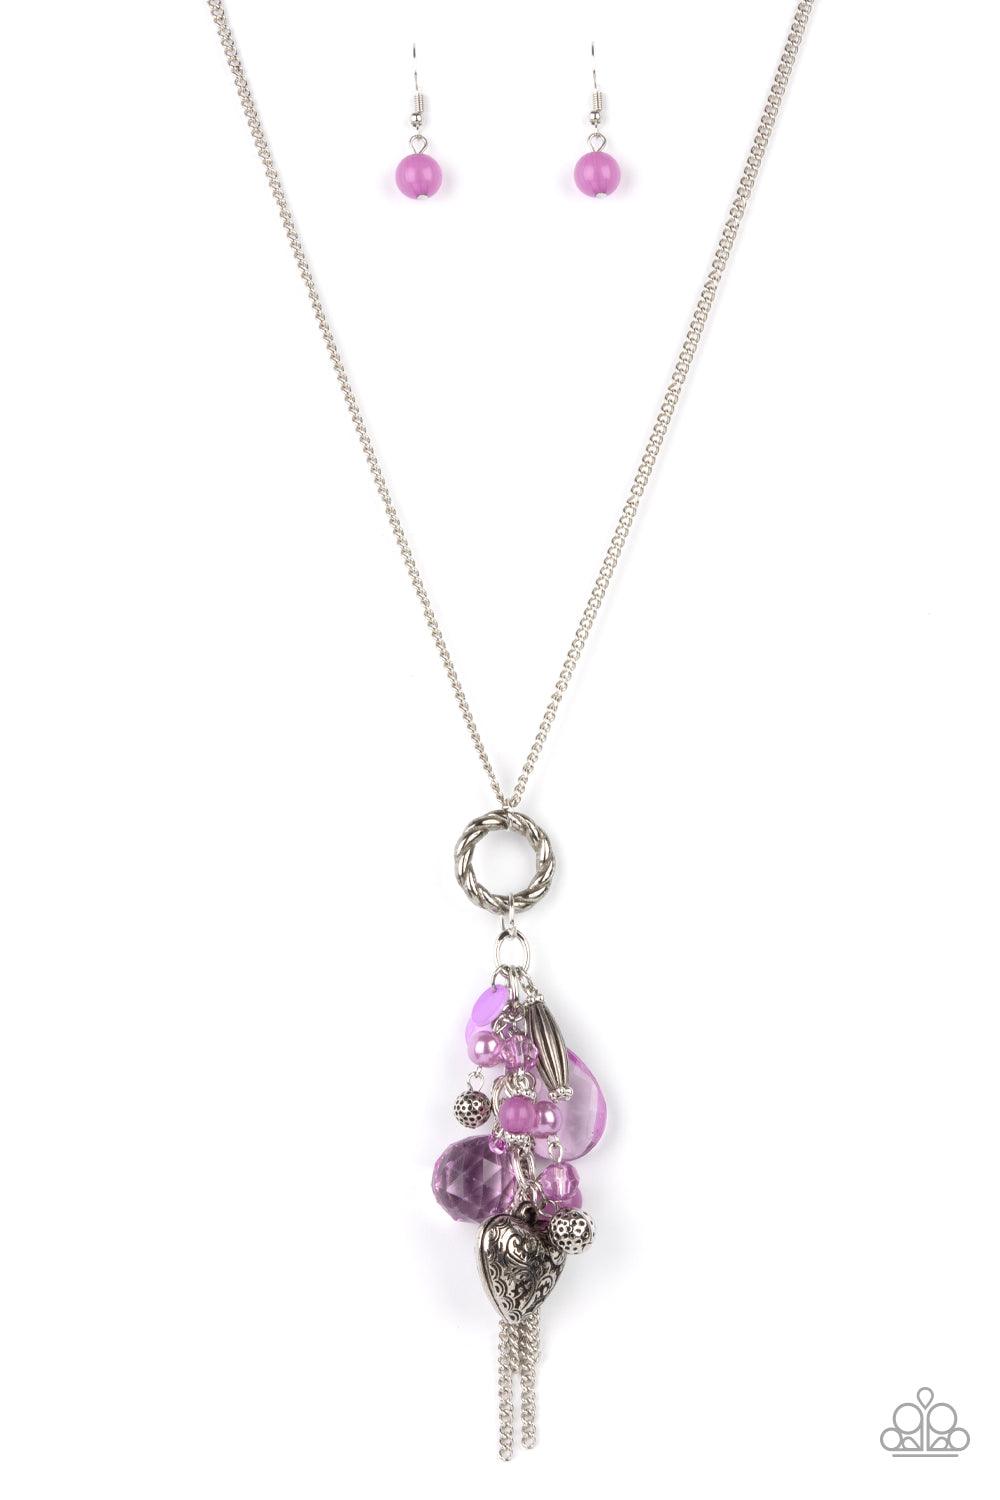 Silver and Purple Gemstone Pendant Necklace · Free Stock Photo